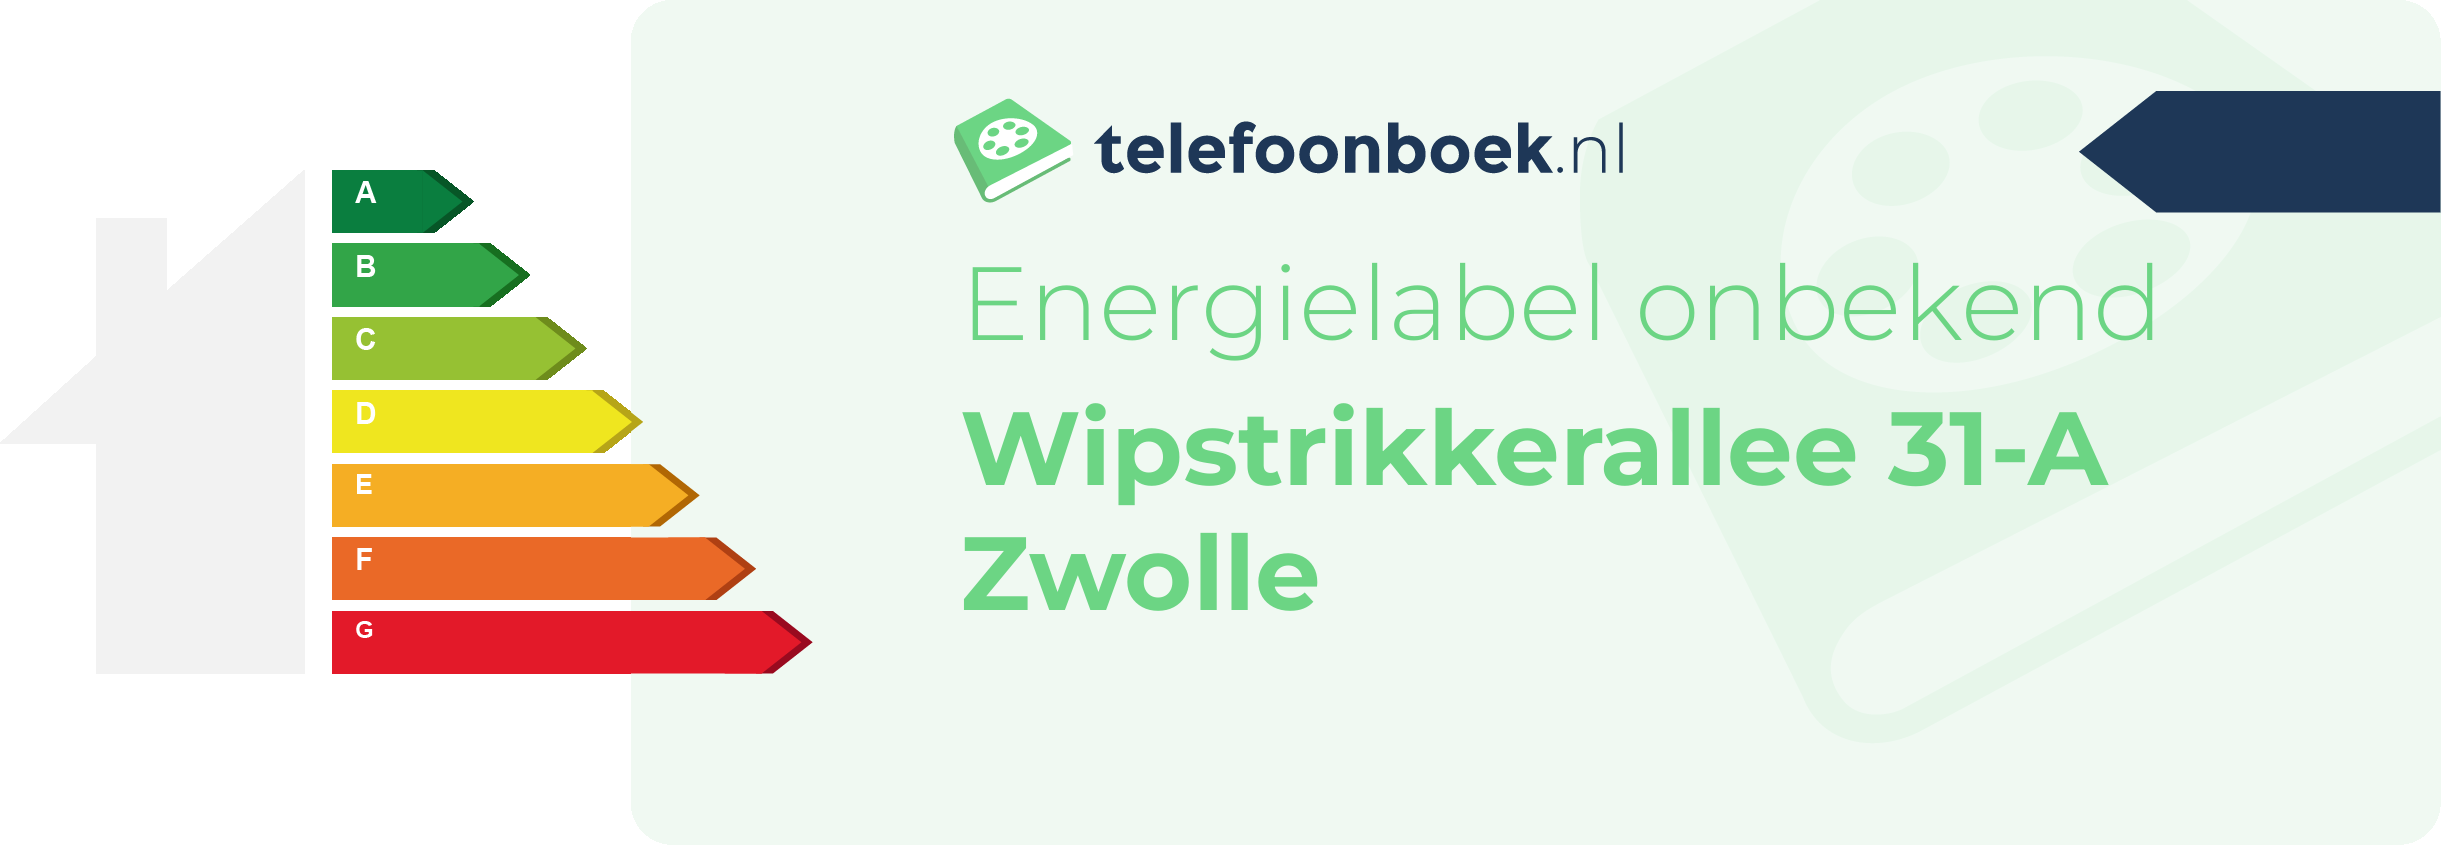 Energielabel Wipstrikkerallee 31-A Zwolle